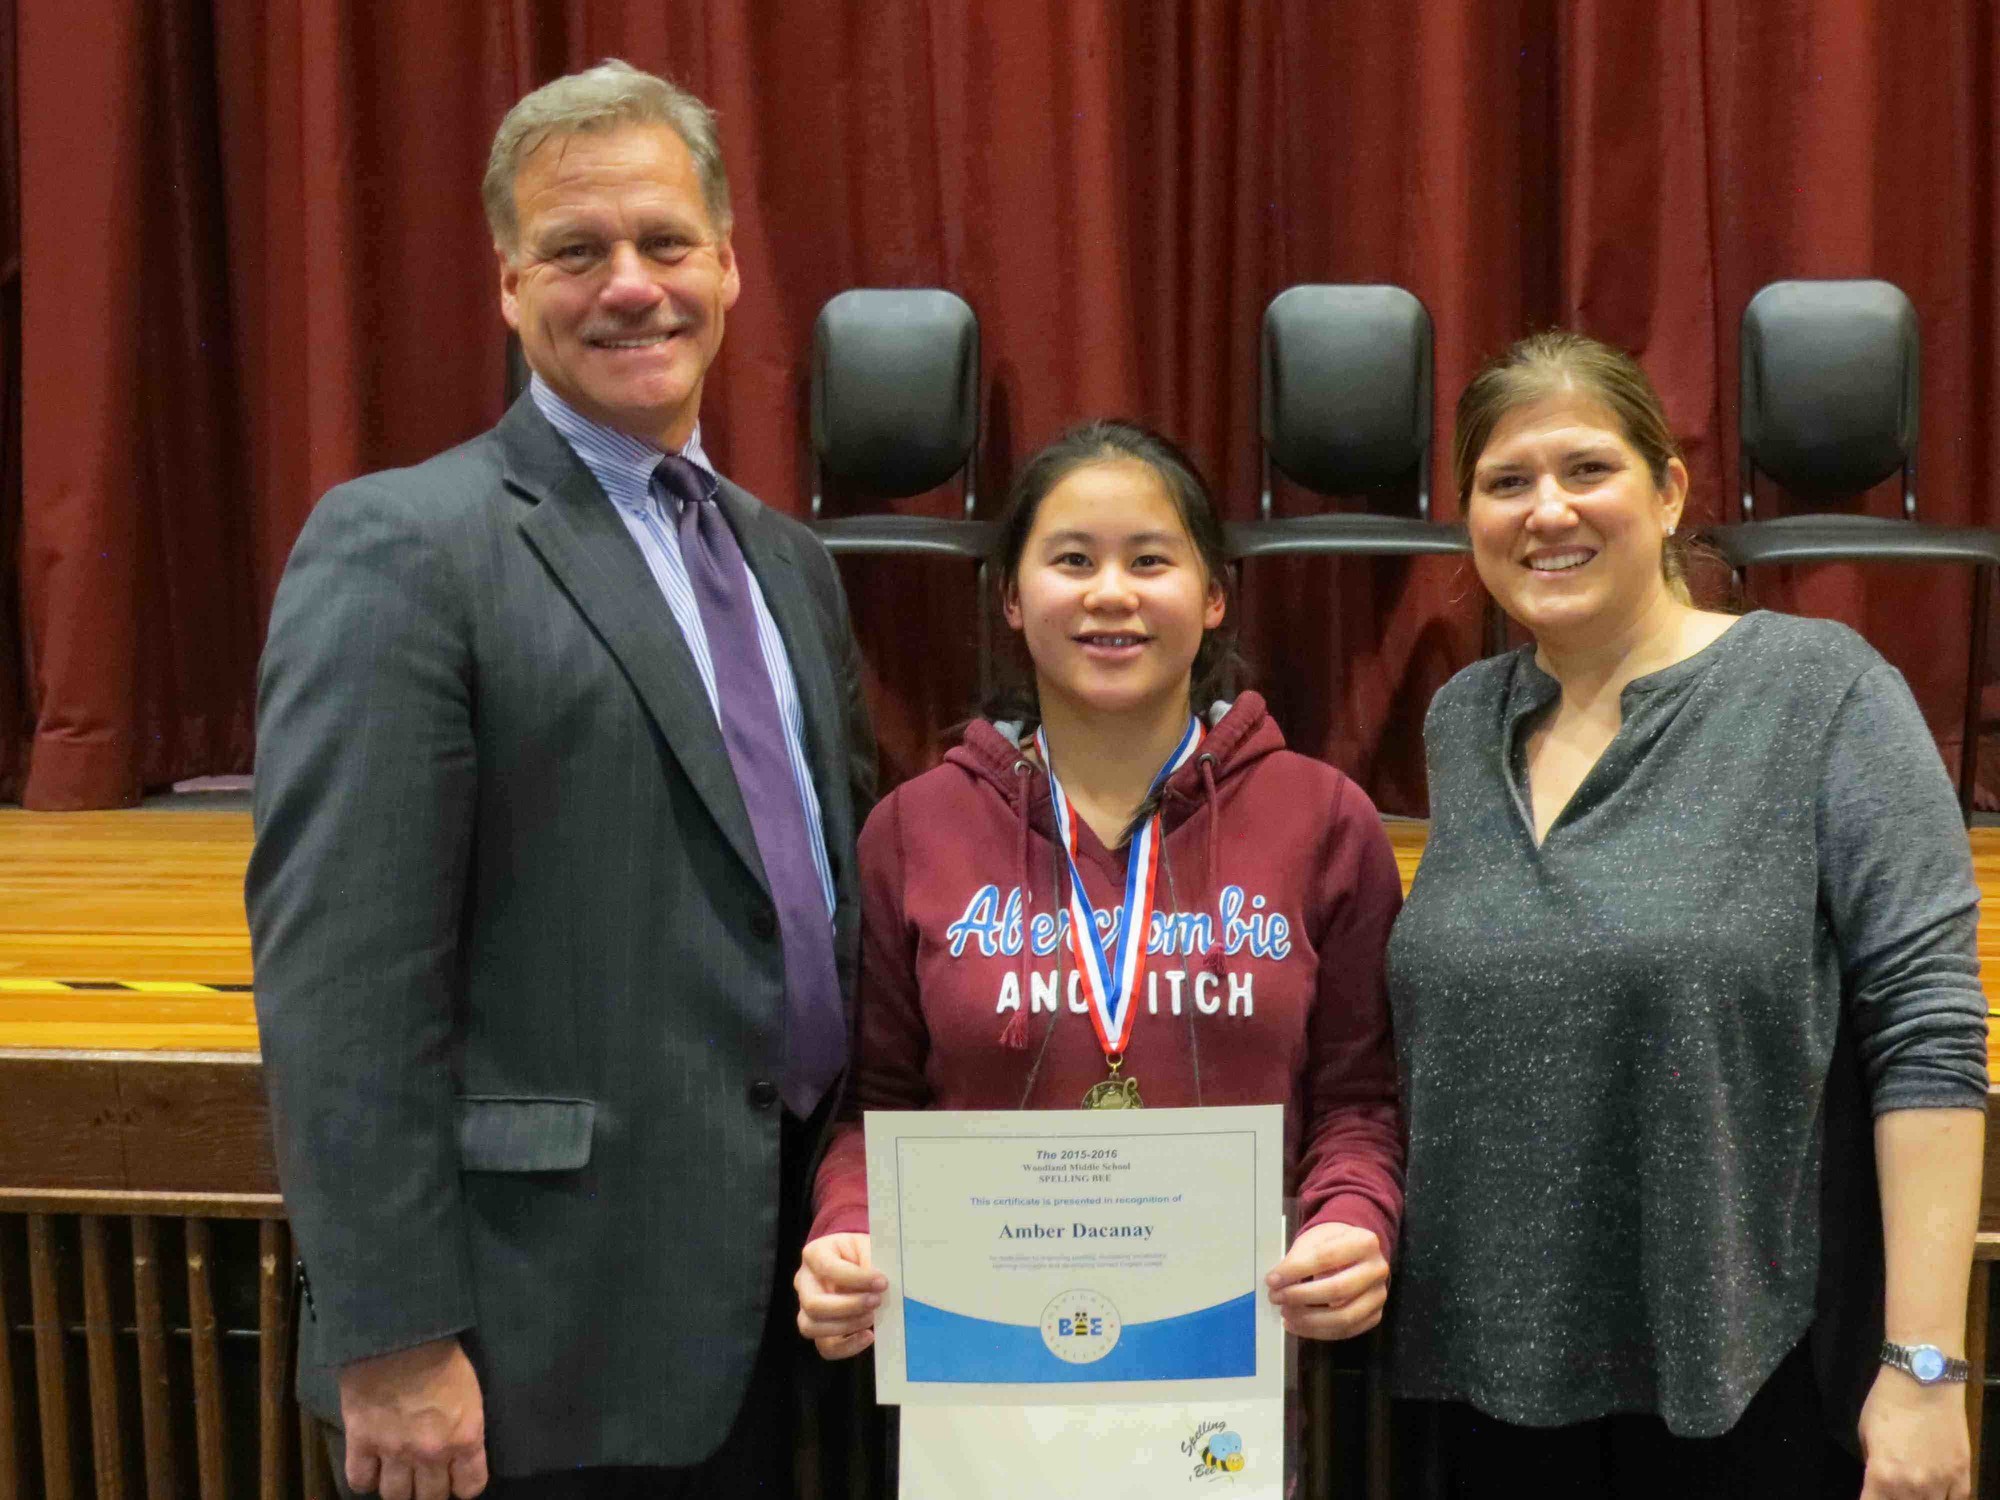 Woodland Middle School spelling bee champion Amber Dacanay met with Principal James Lethbridge and Woodland and Clarke Middle English Chairperson Rebecca Regan after she won the contest.